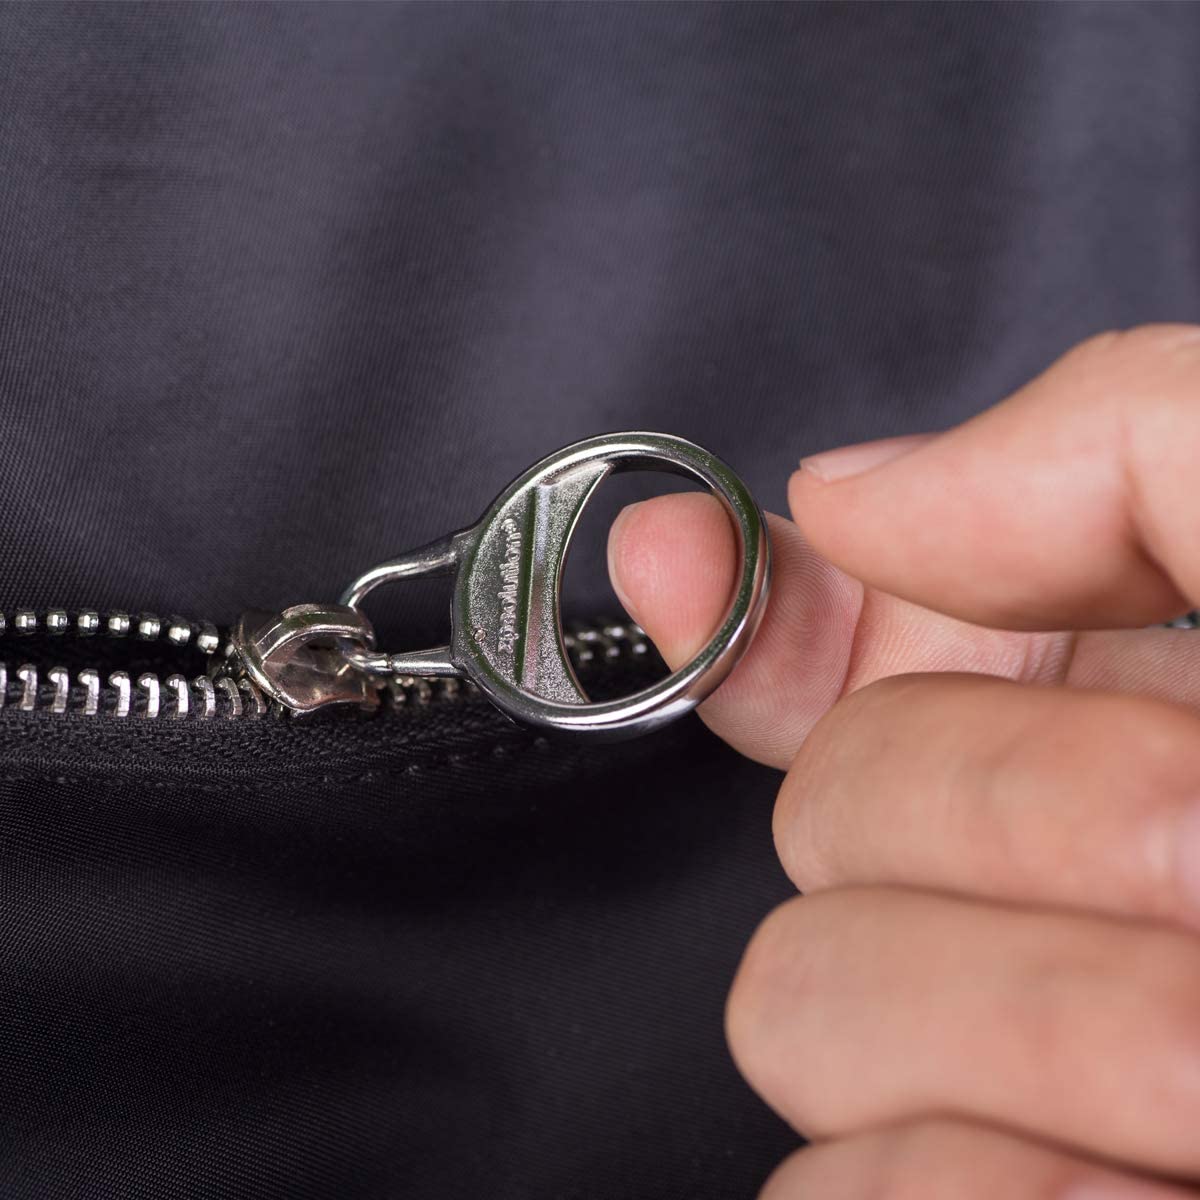 Zipper Pull Replacement for Who with Arthritis or Limited Hand Dexterity